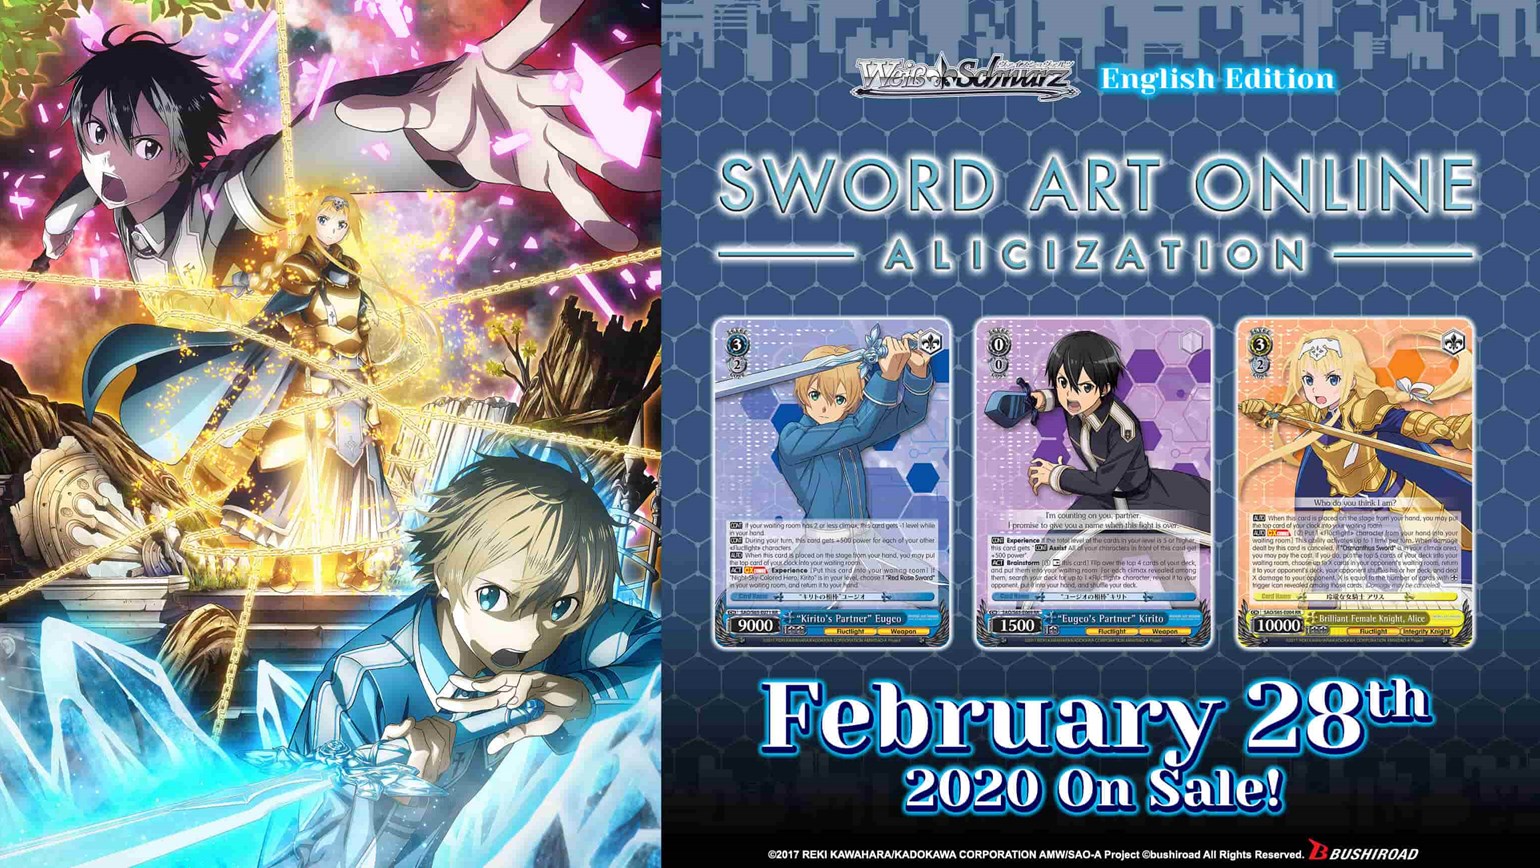 Sword Art Online -Alicization- Coming to Weiss Schwarz on February 28th